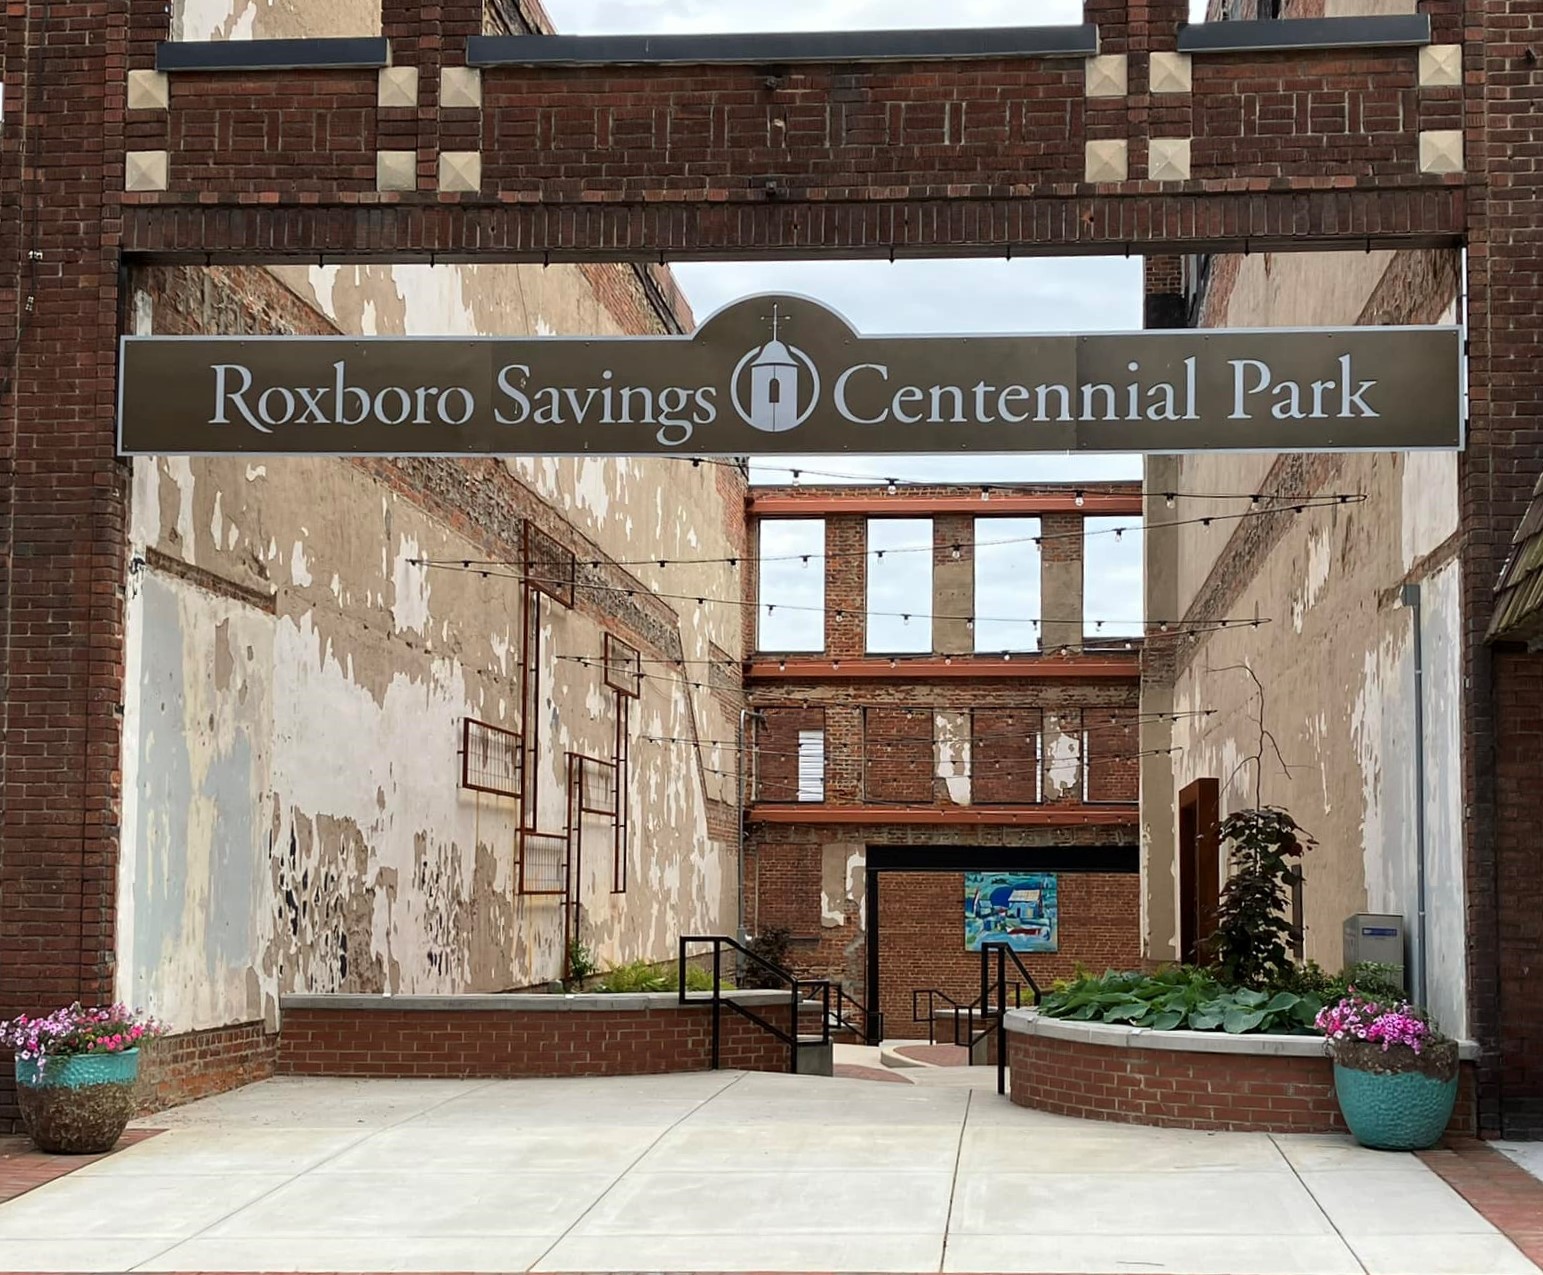 A sign for Roxboro Savings Centennial Park spanning two brick buildings